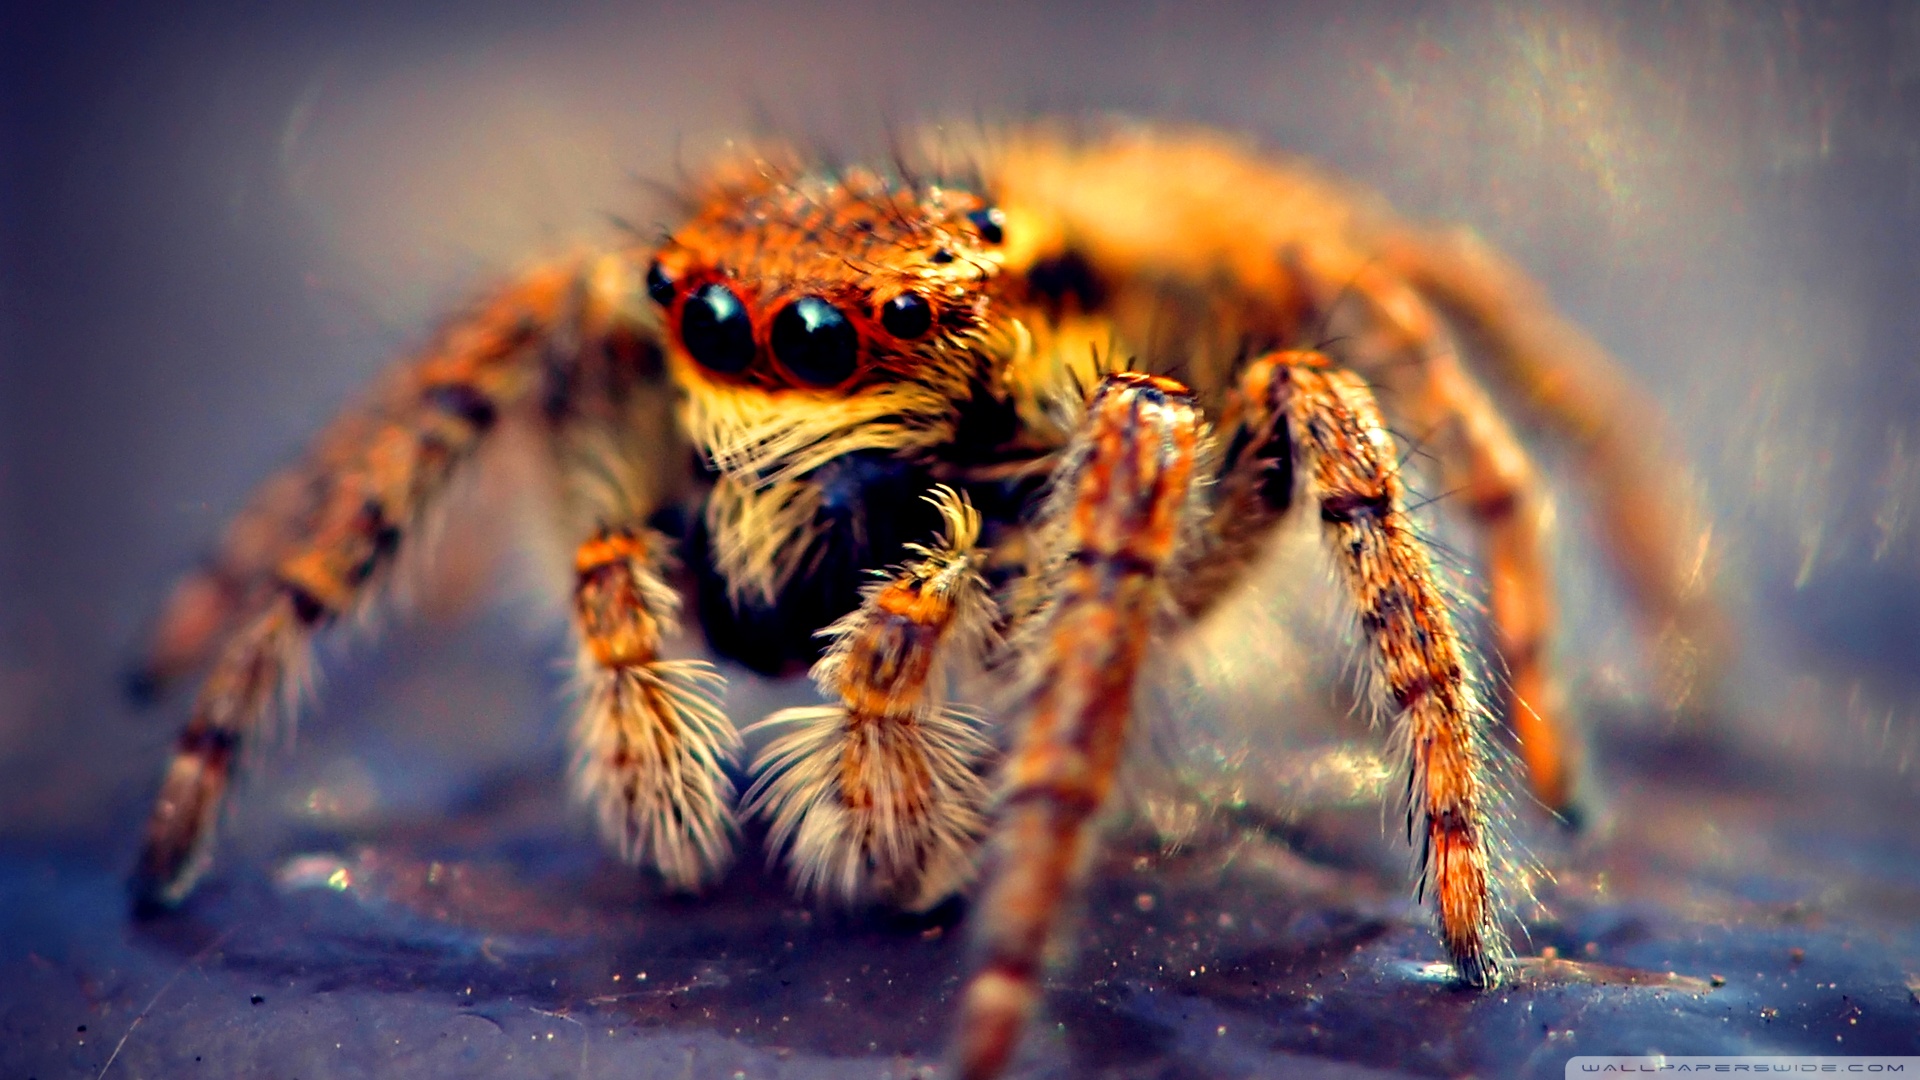 spider wallpaper,spider,macro photography,close up,invertebrate,insect